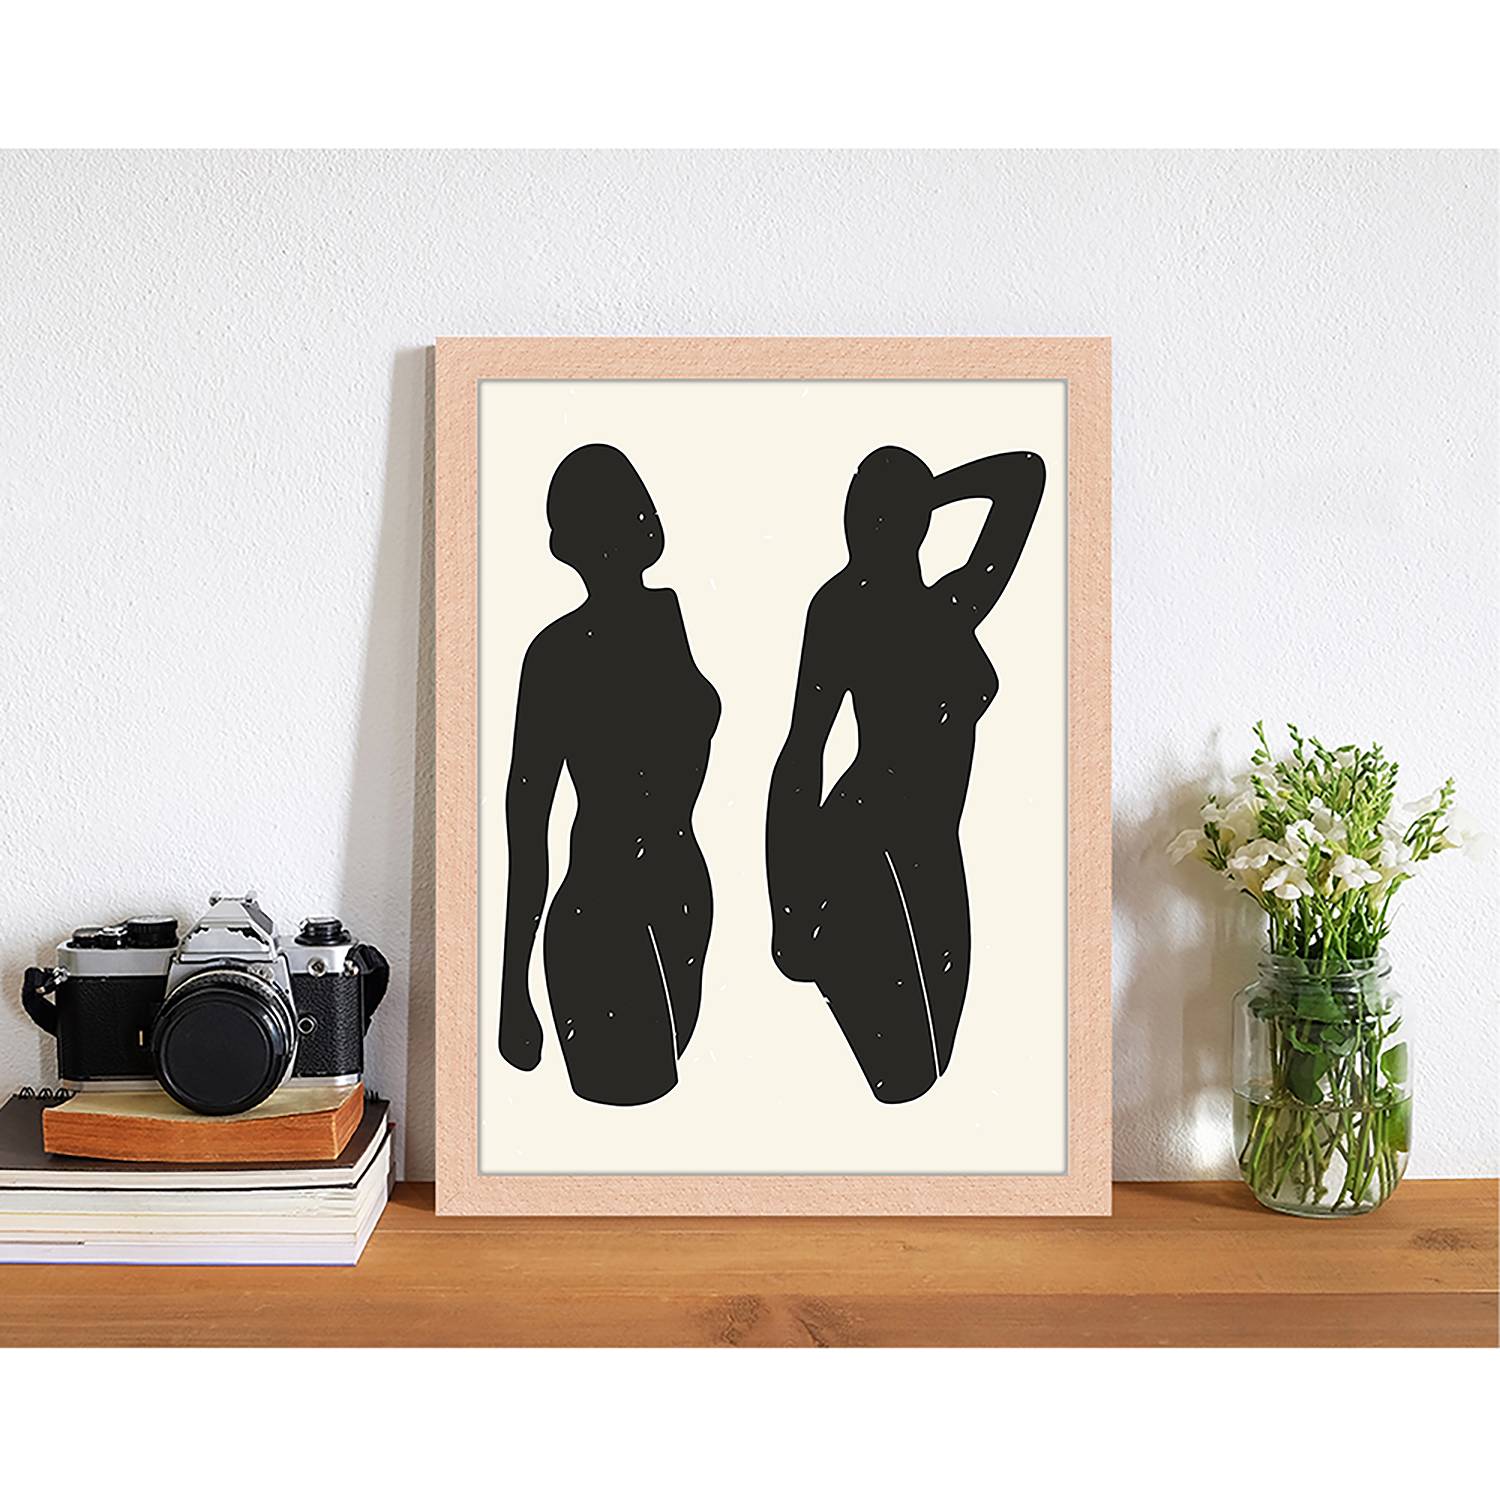 Image of Tableau déco Abstract Black Bodies 000000001000280333